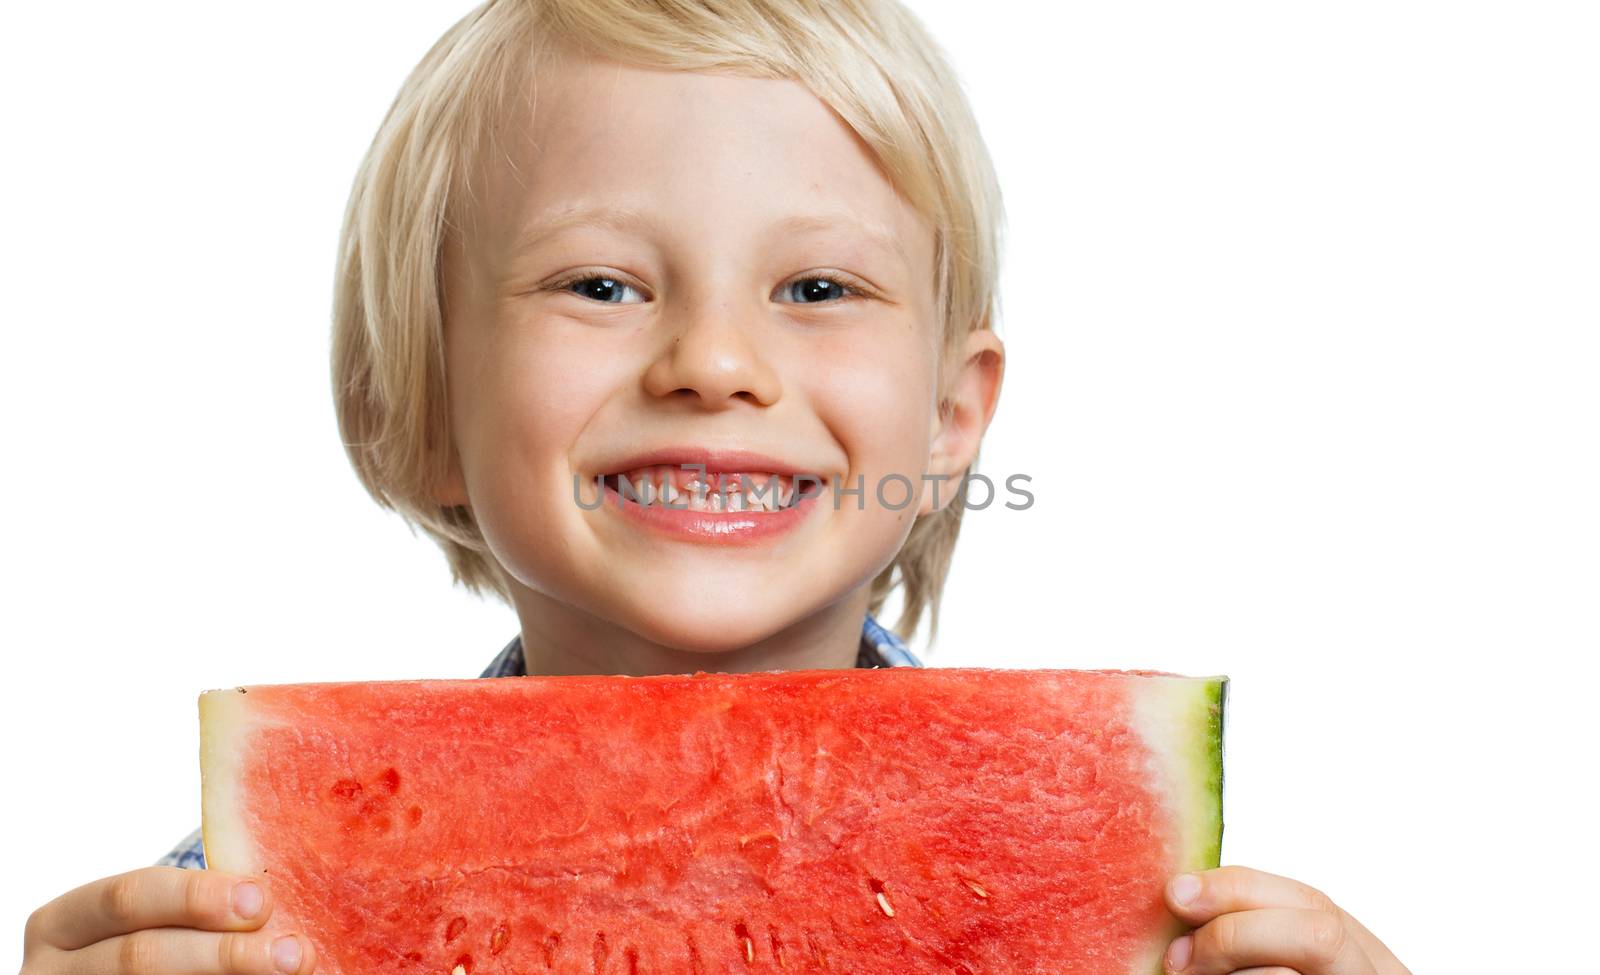 A cute laughing boy holding a juicy  slice of watermelon. Isolated on white.